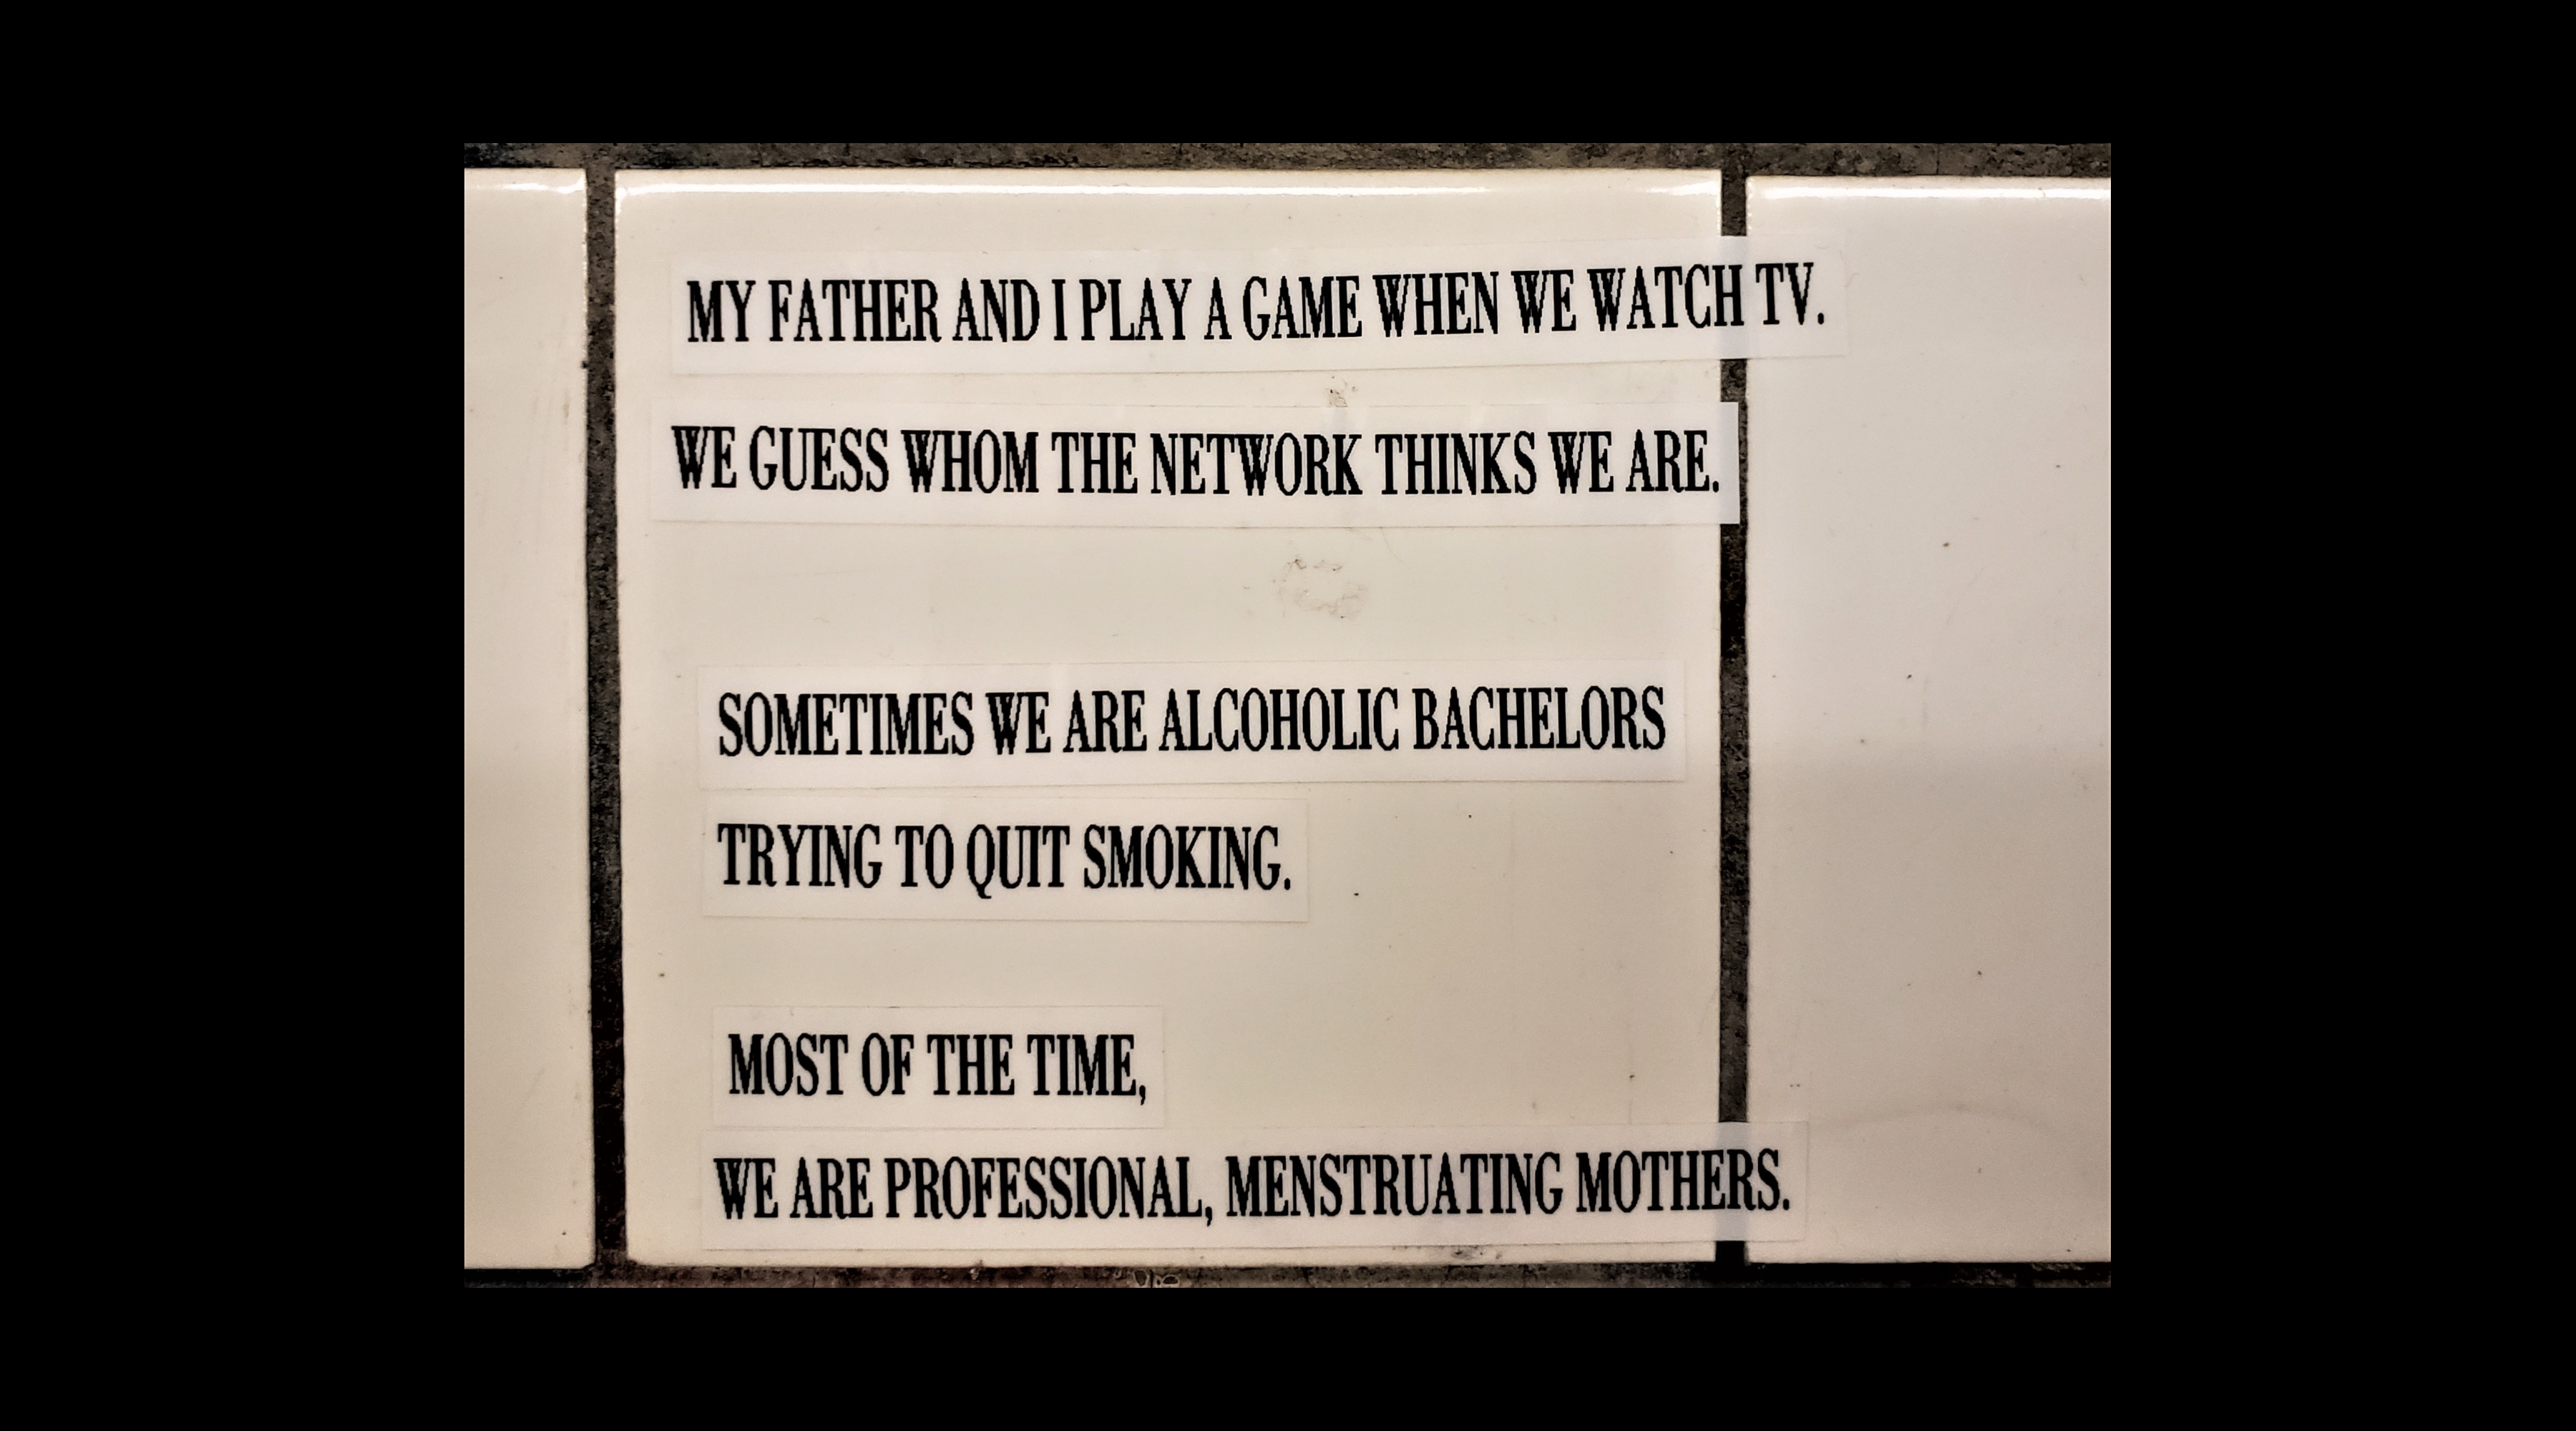 My father and I play a game when we watch TV. / We guess whom the network thinks we are. // Sometimes we are alcoholic bachelors / trying to quit smoking. // Most of the time, / we are professional, menstruating mothers.